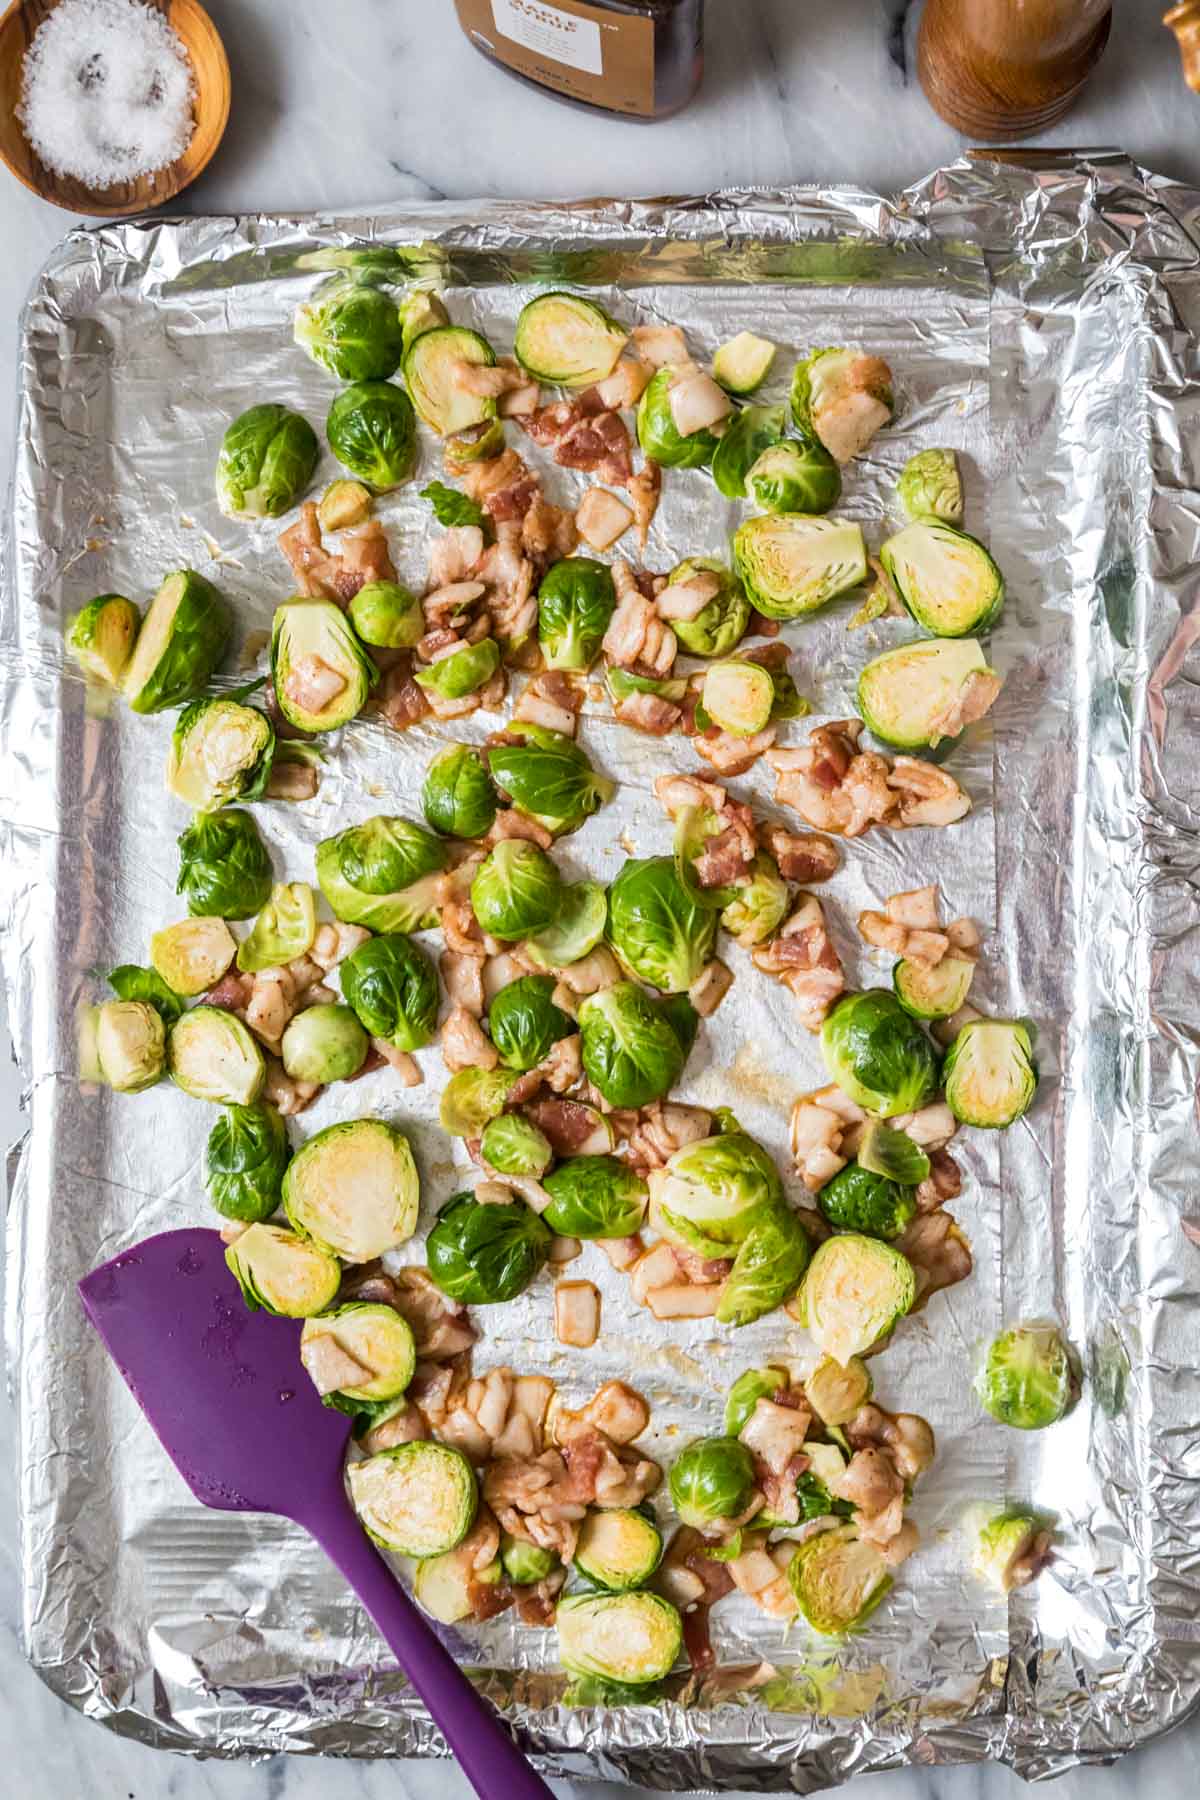 Overhead view of a foil lined baking sheet with brussels sprouts and bacon on it.